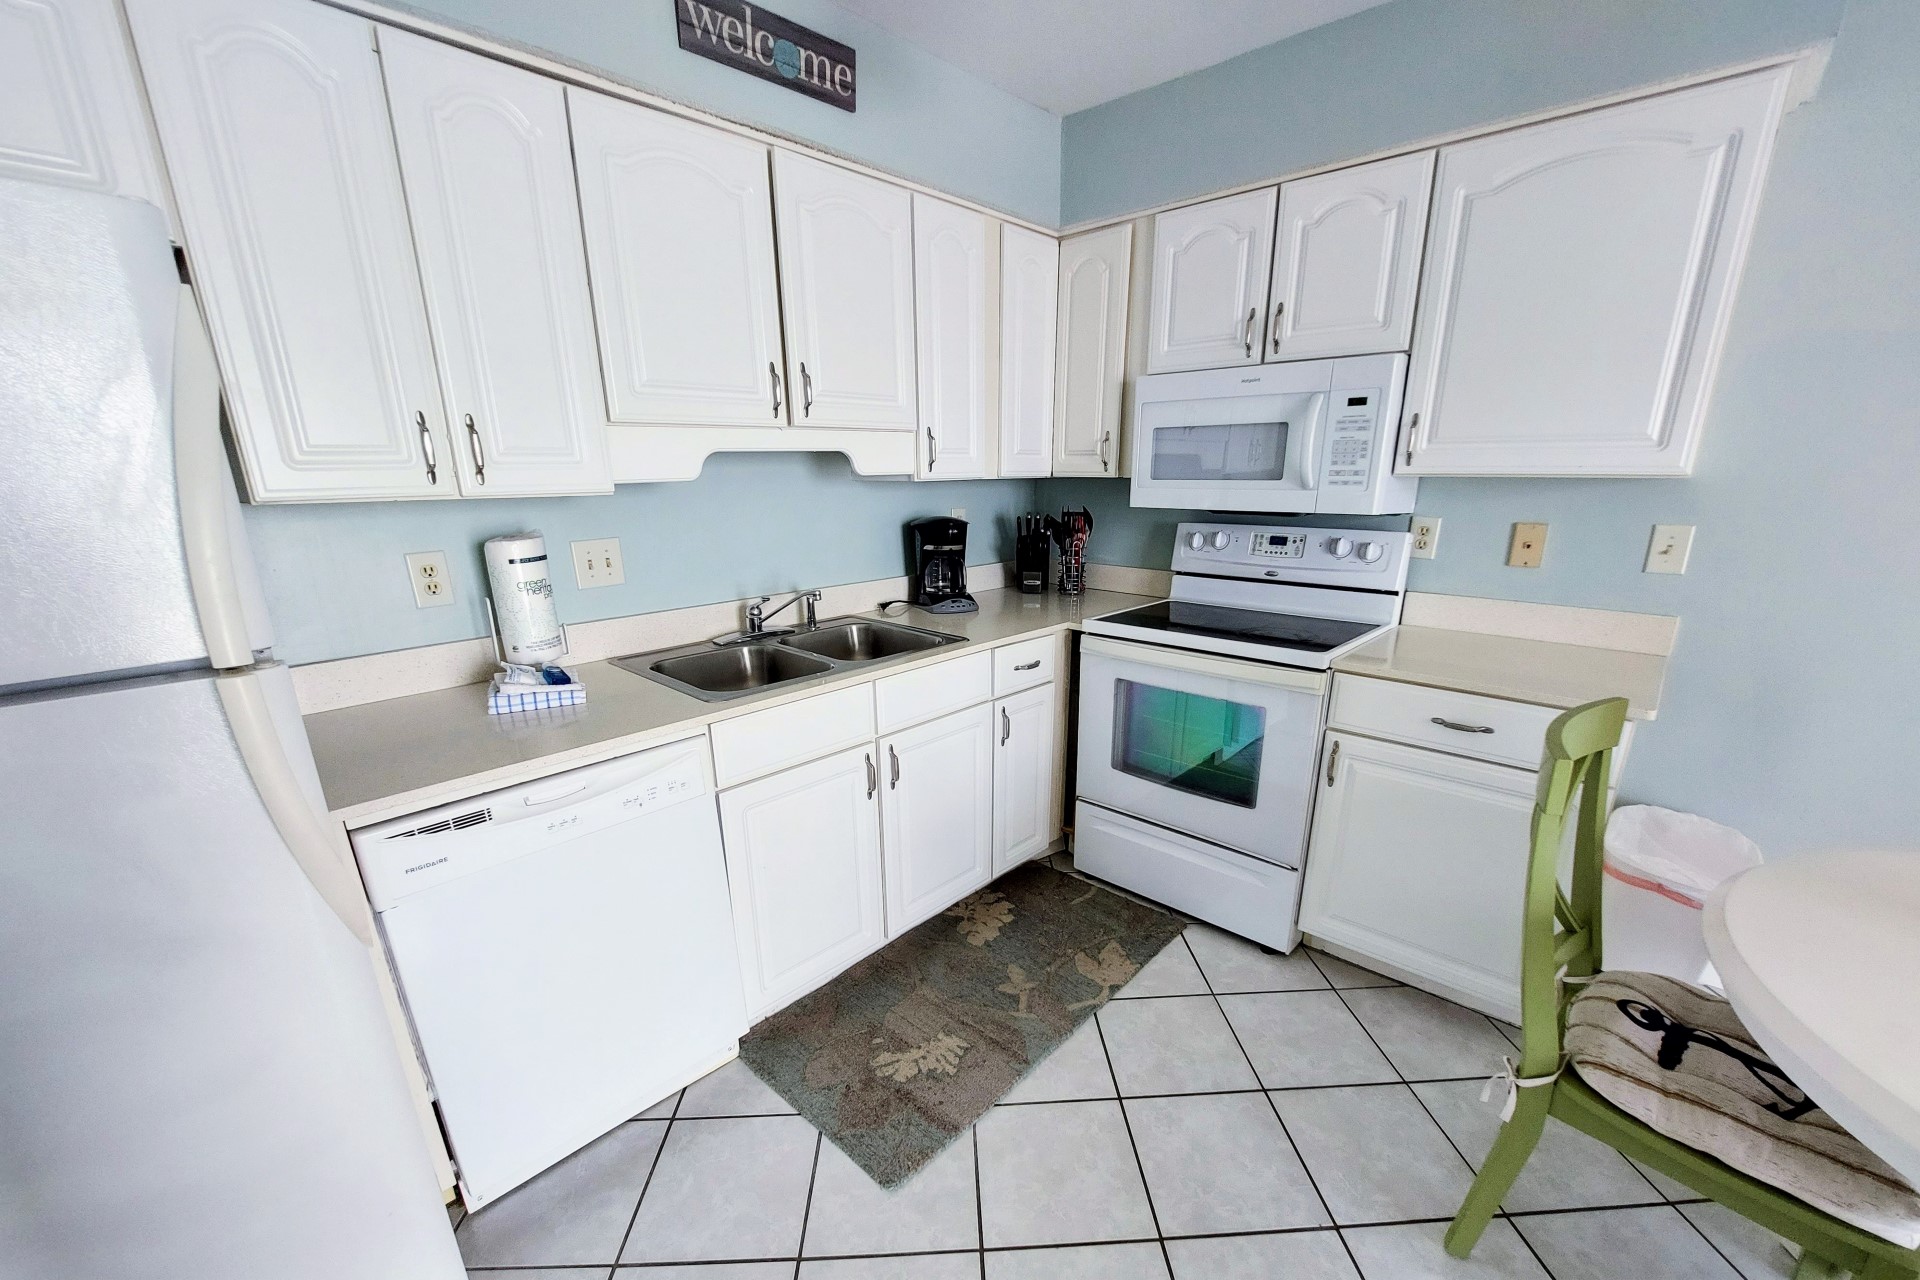 Prepare home-cooked meals in the fully equipped kitchen!